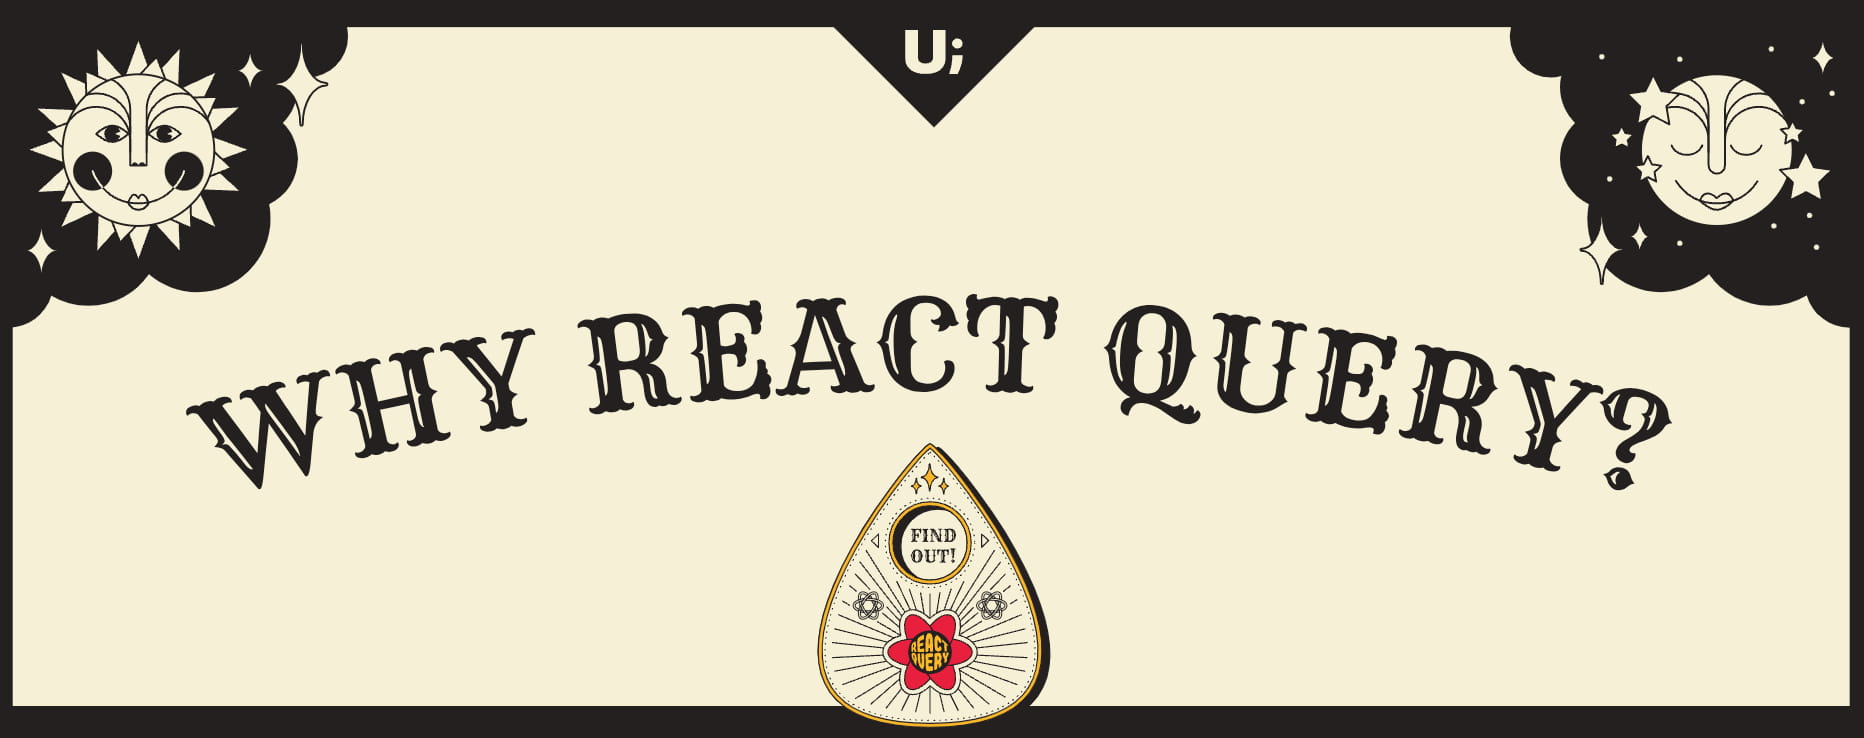 Why React Query?